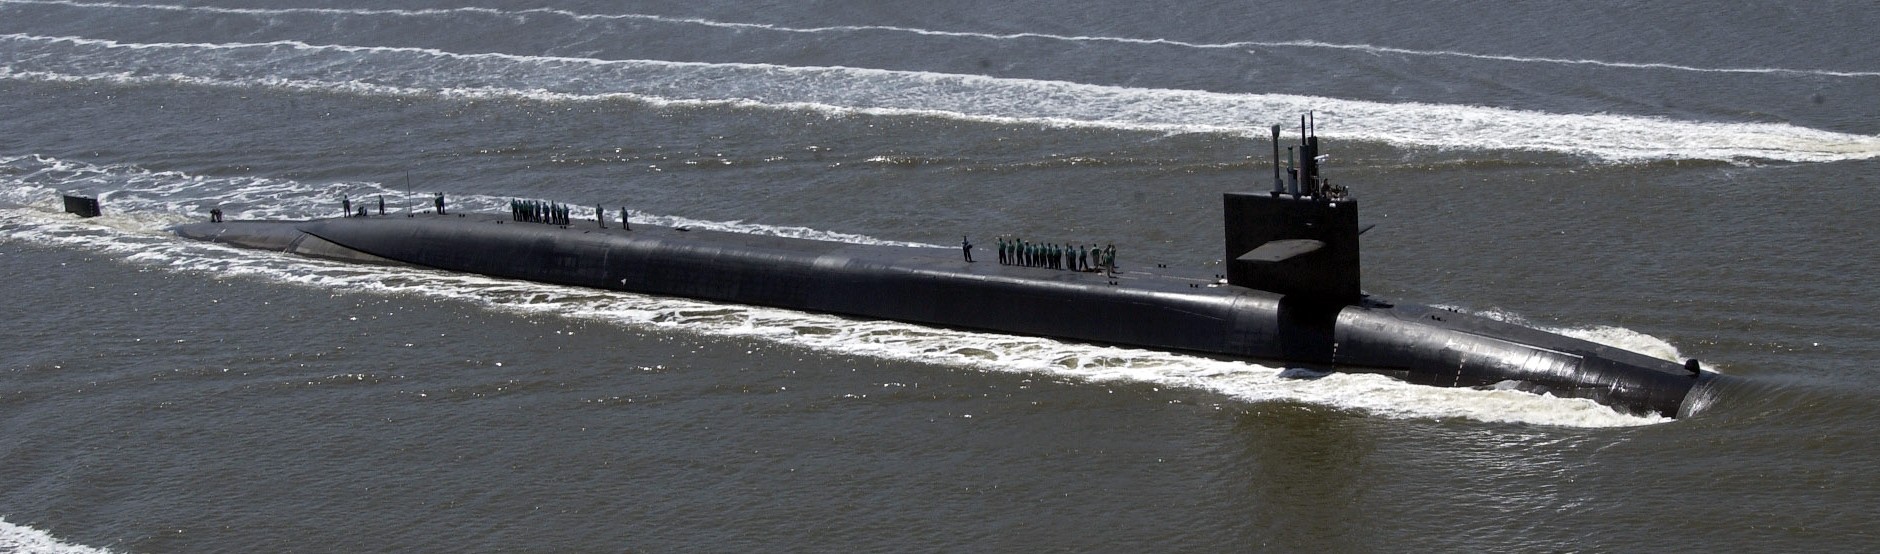 ssgn-728 uss florida guided missile submarine us navy 2006 42